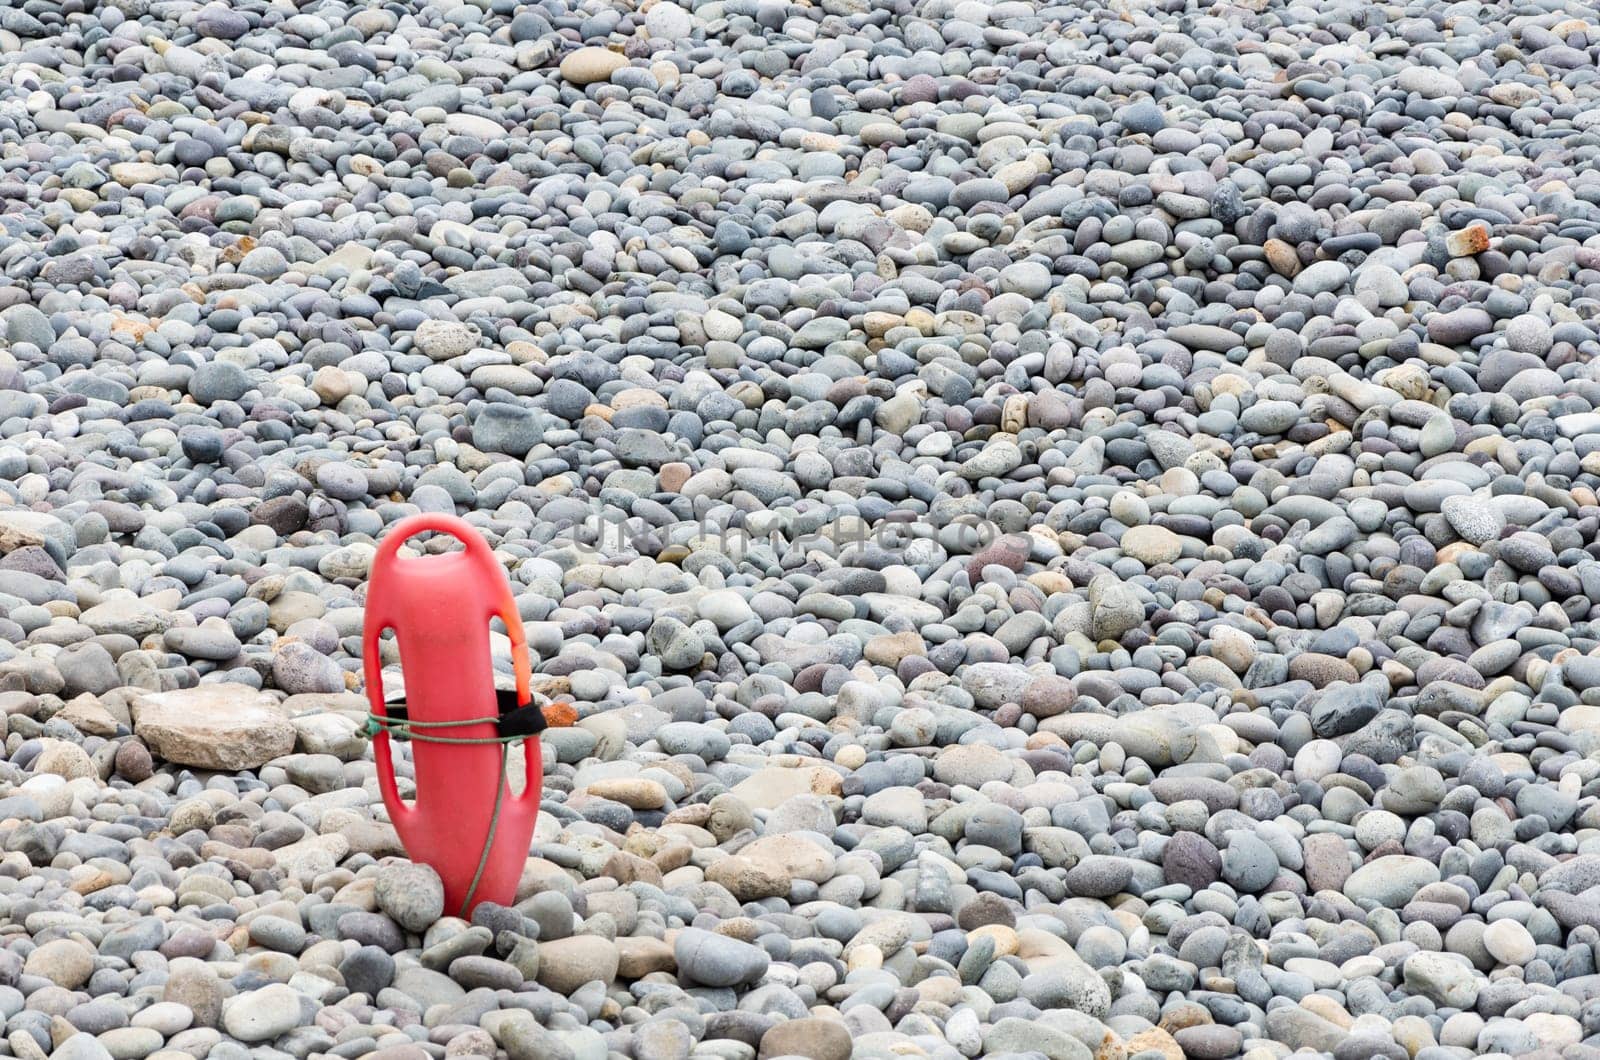 Red plastic buoyancy aid in the sand on lonely beach. by Peruphotoart